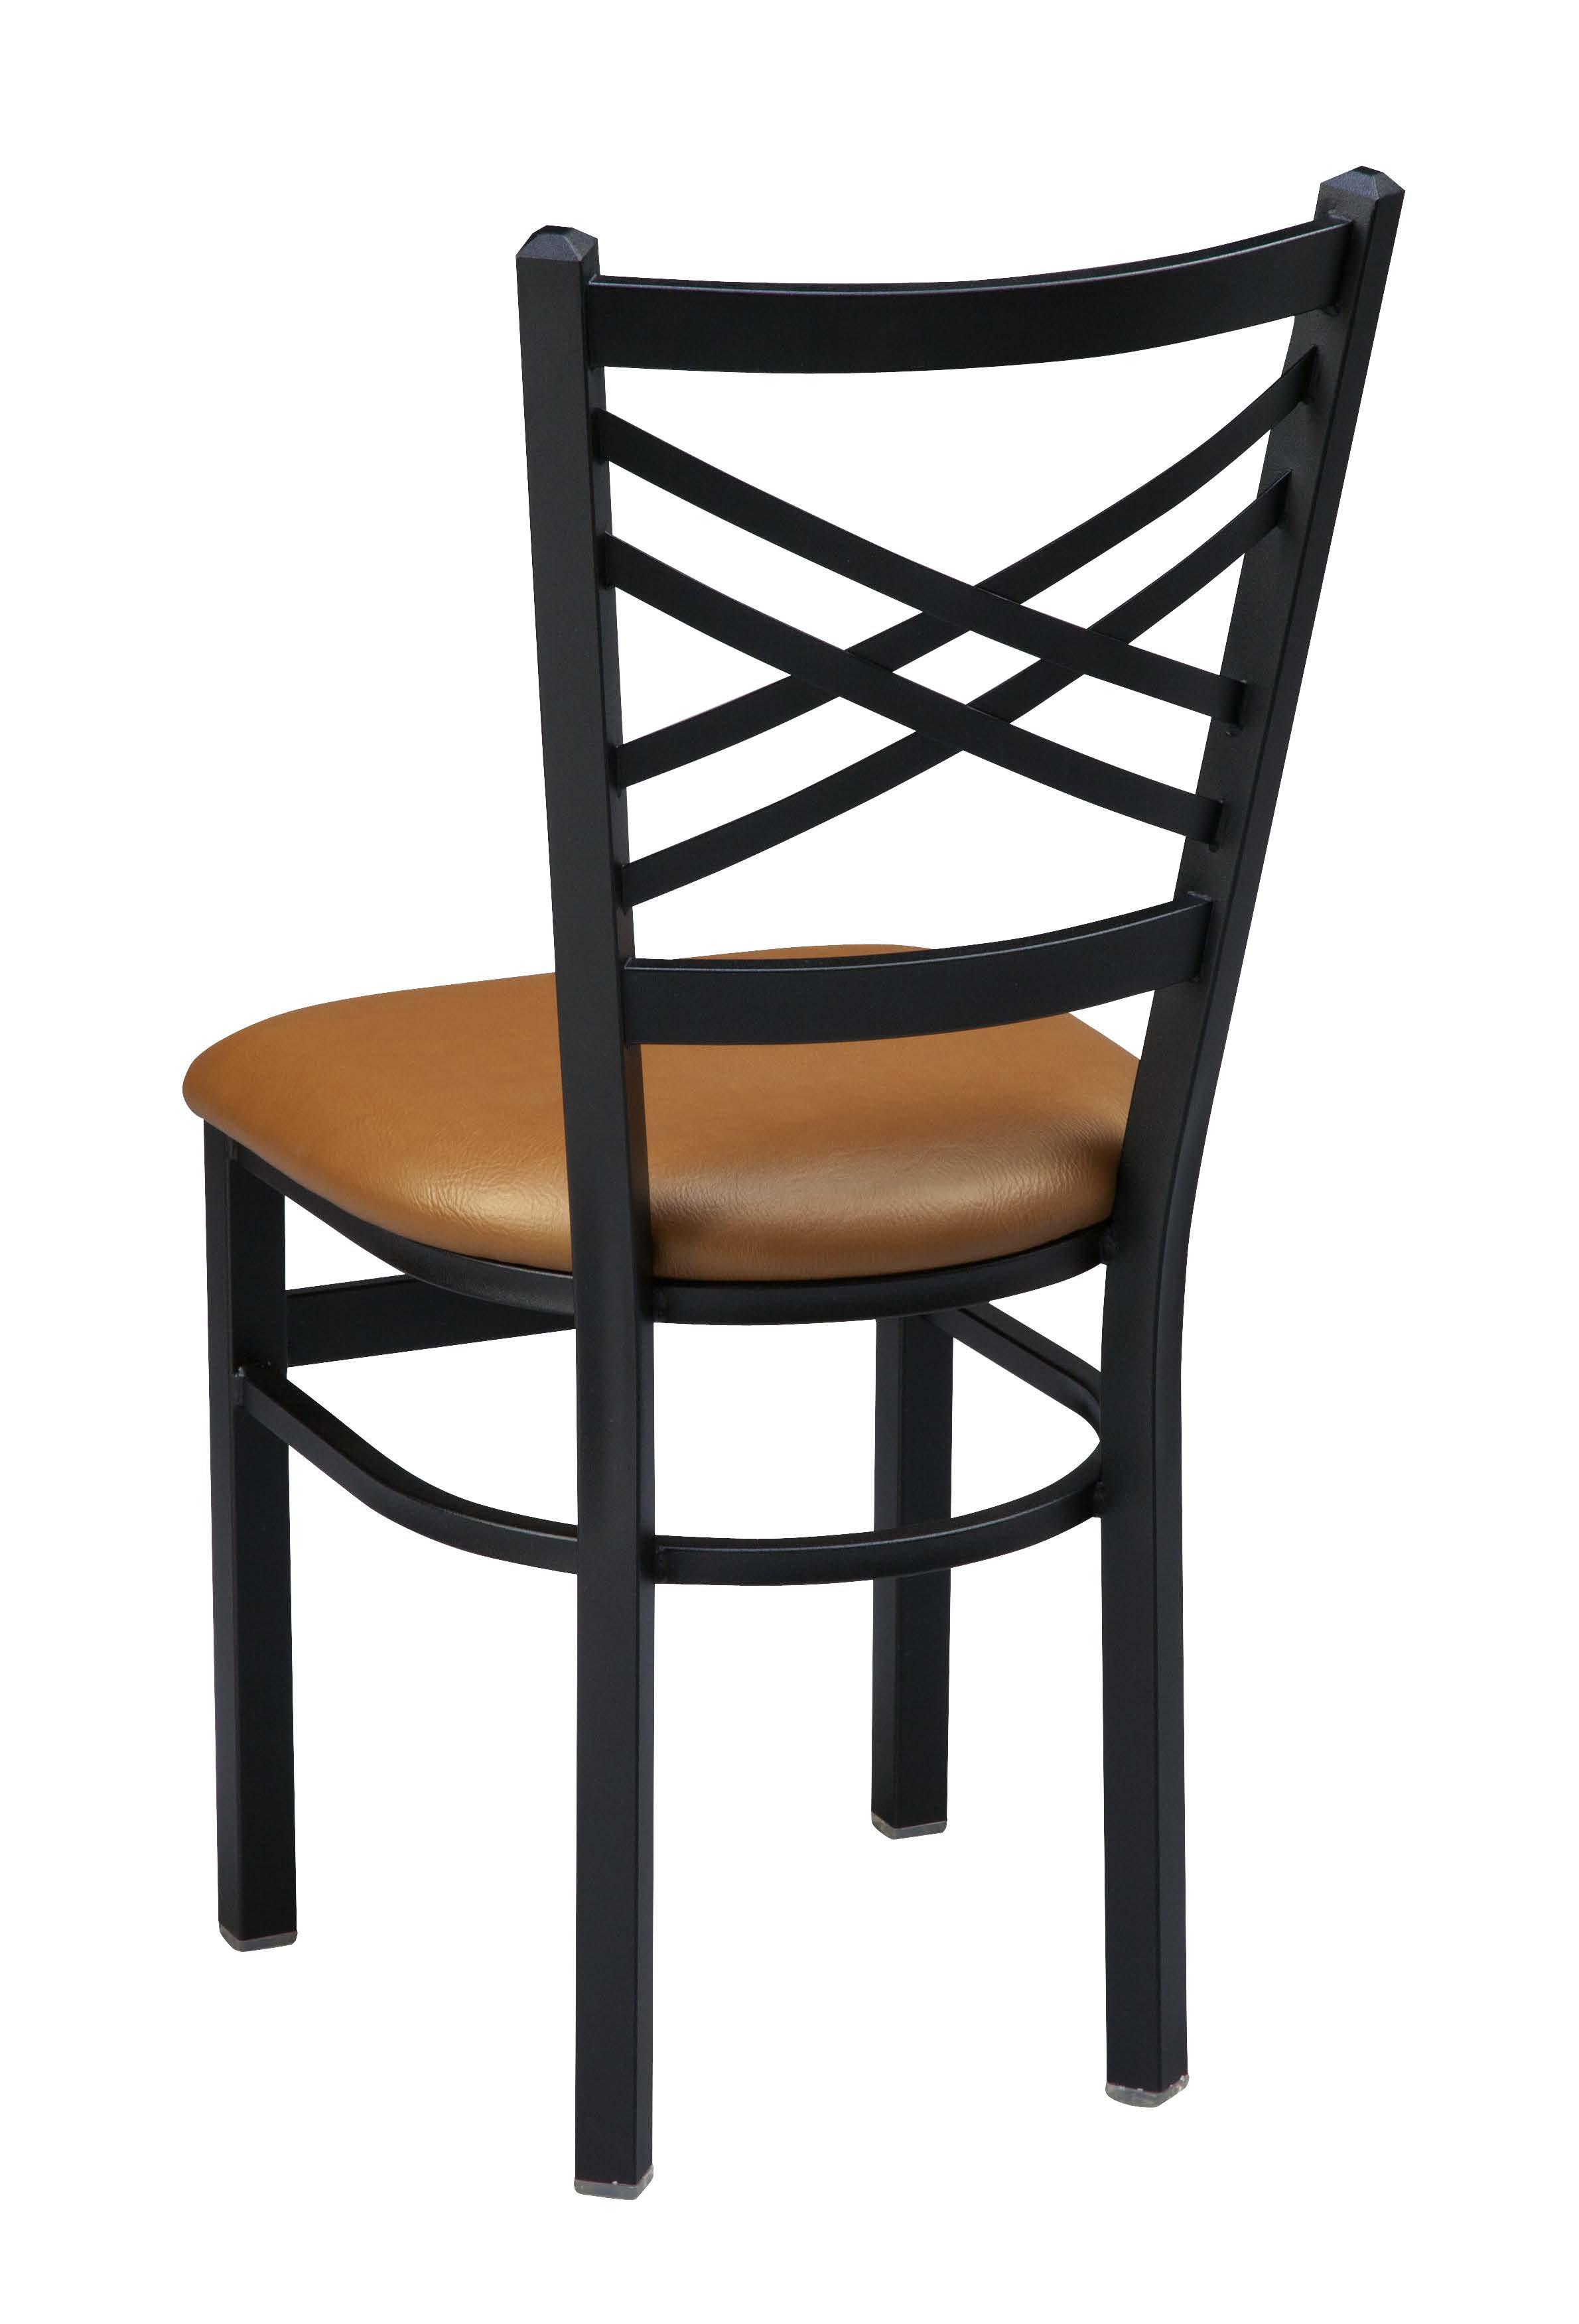 Regal 515TB Tall Back Steel Frame Chair by Braniff Barstools